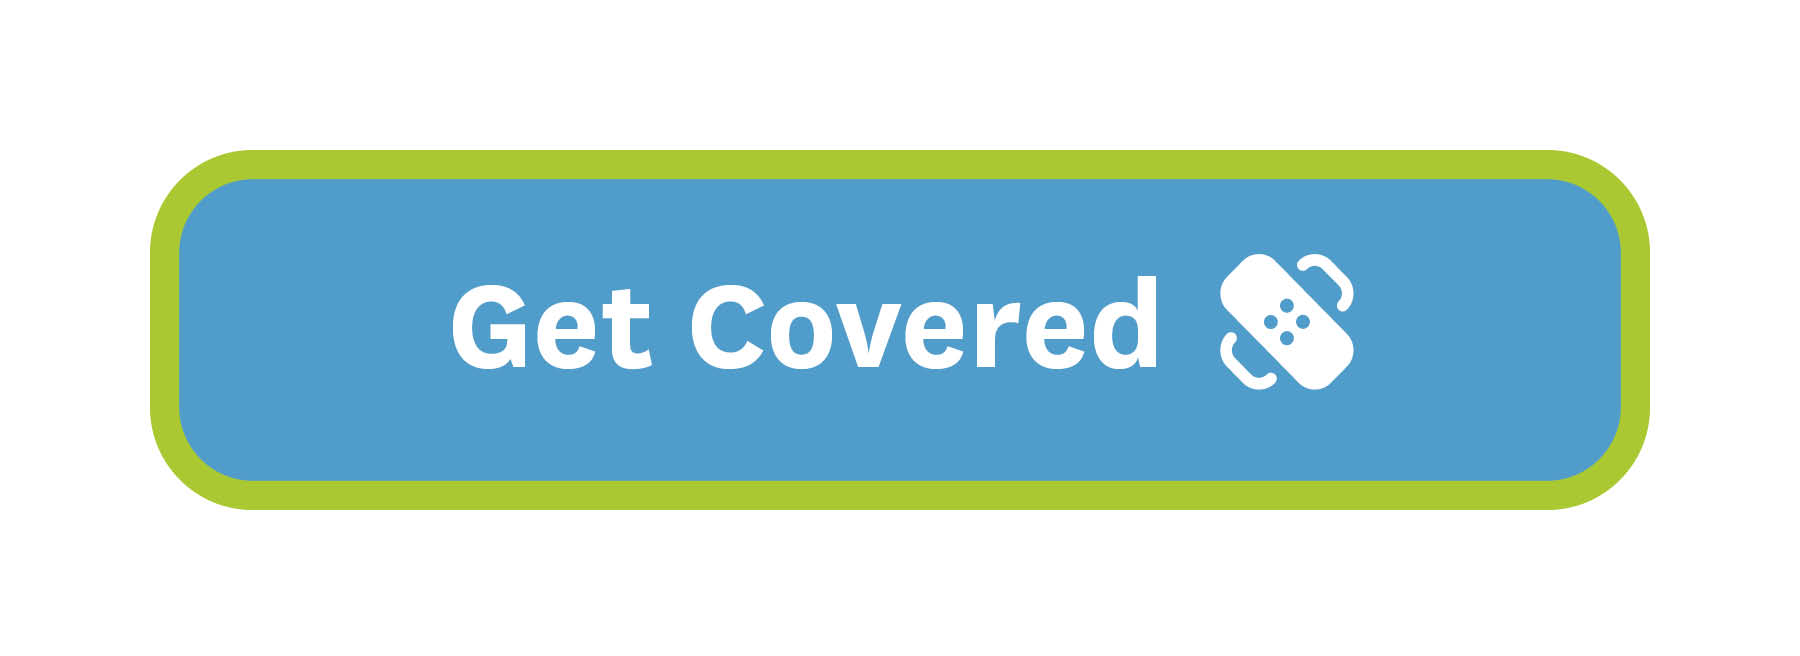  Get Covered